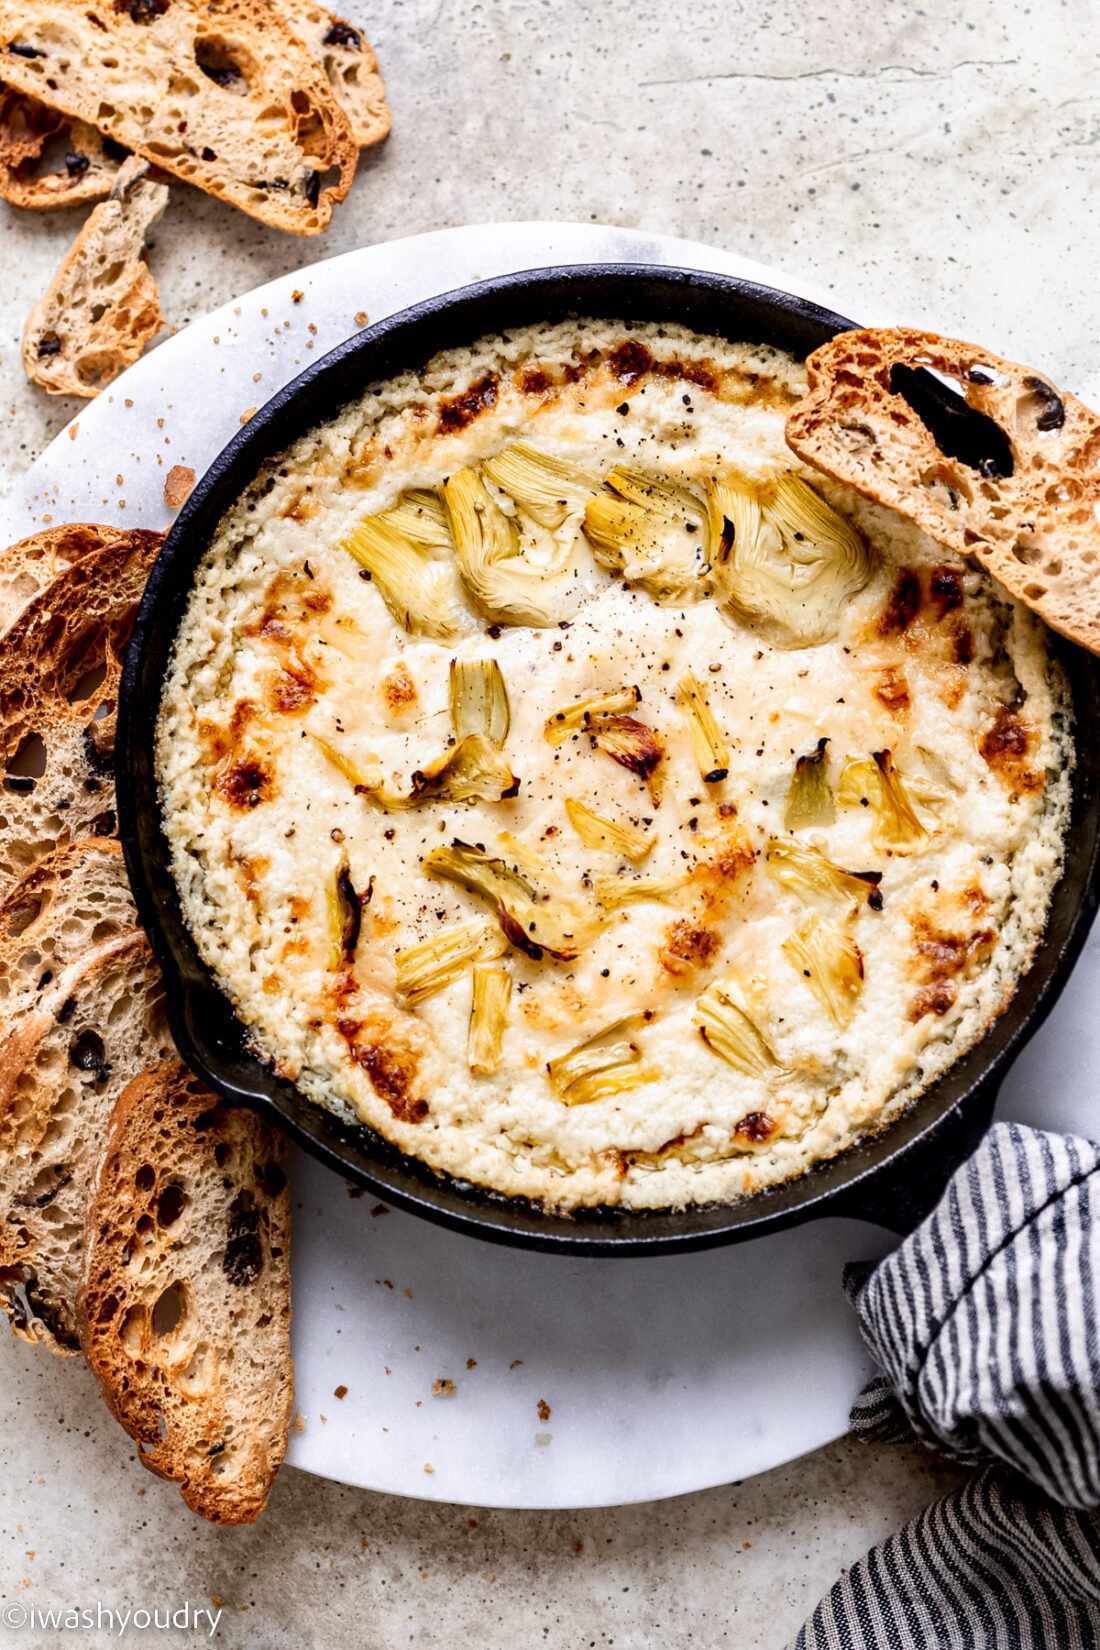 Hot Artichoke Dip in black bowl with slices of bread around.